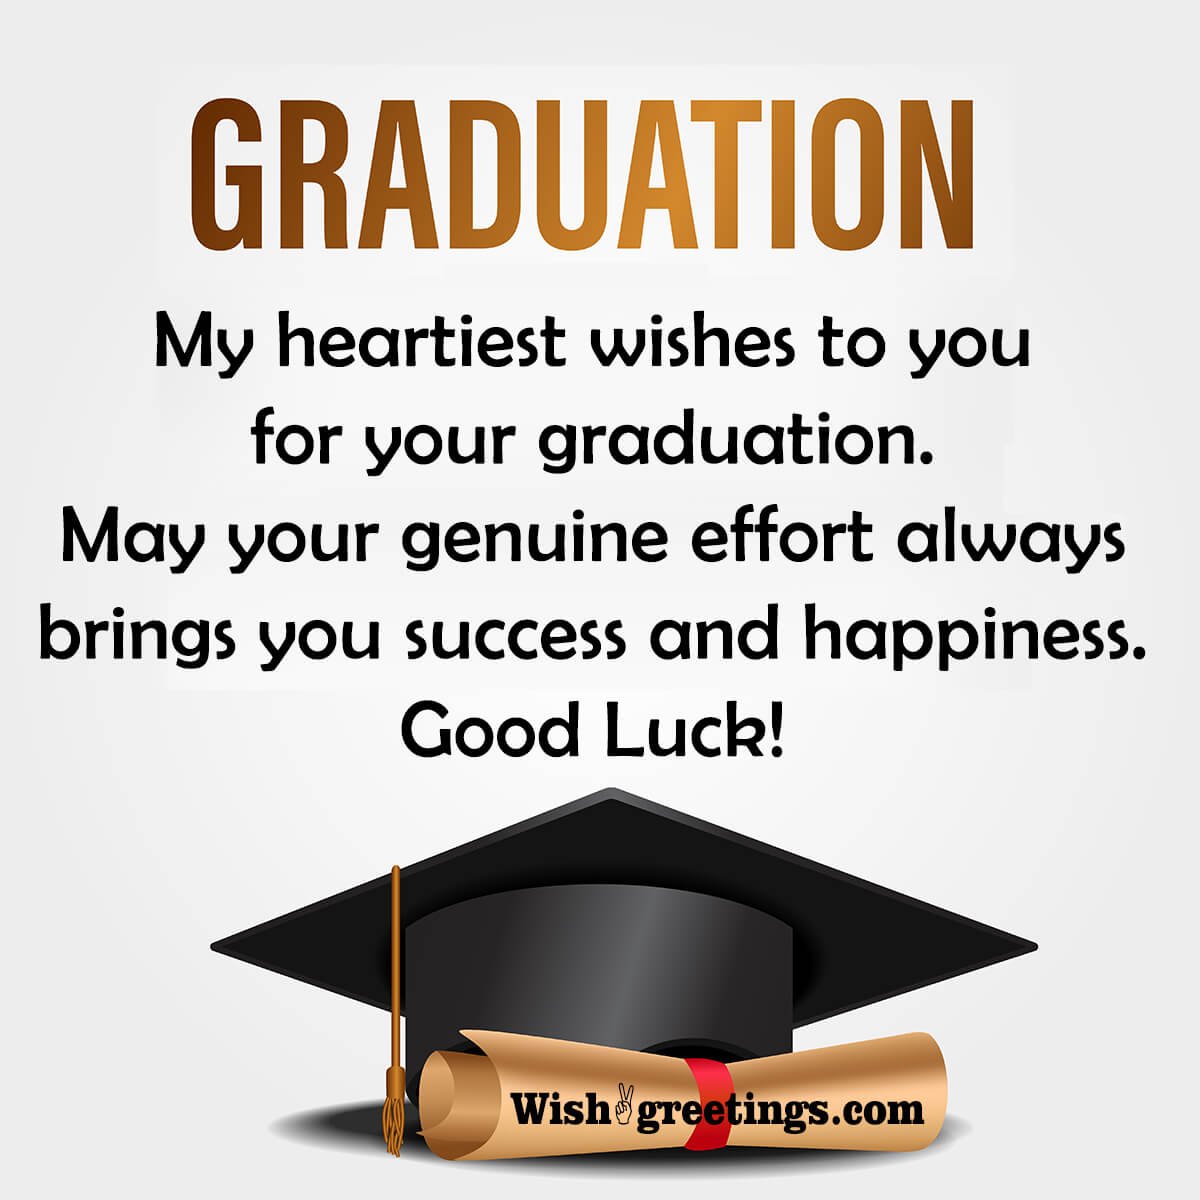 graduation-wishes-images-wish-greetings